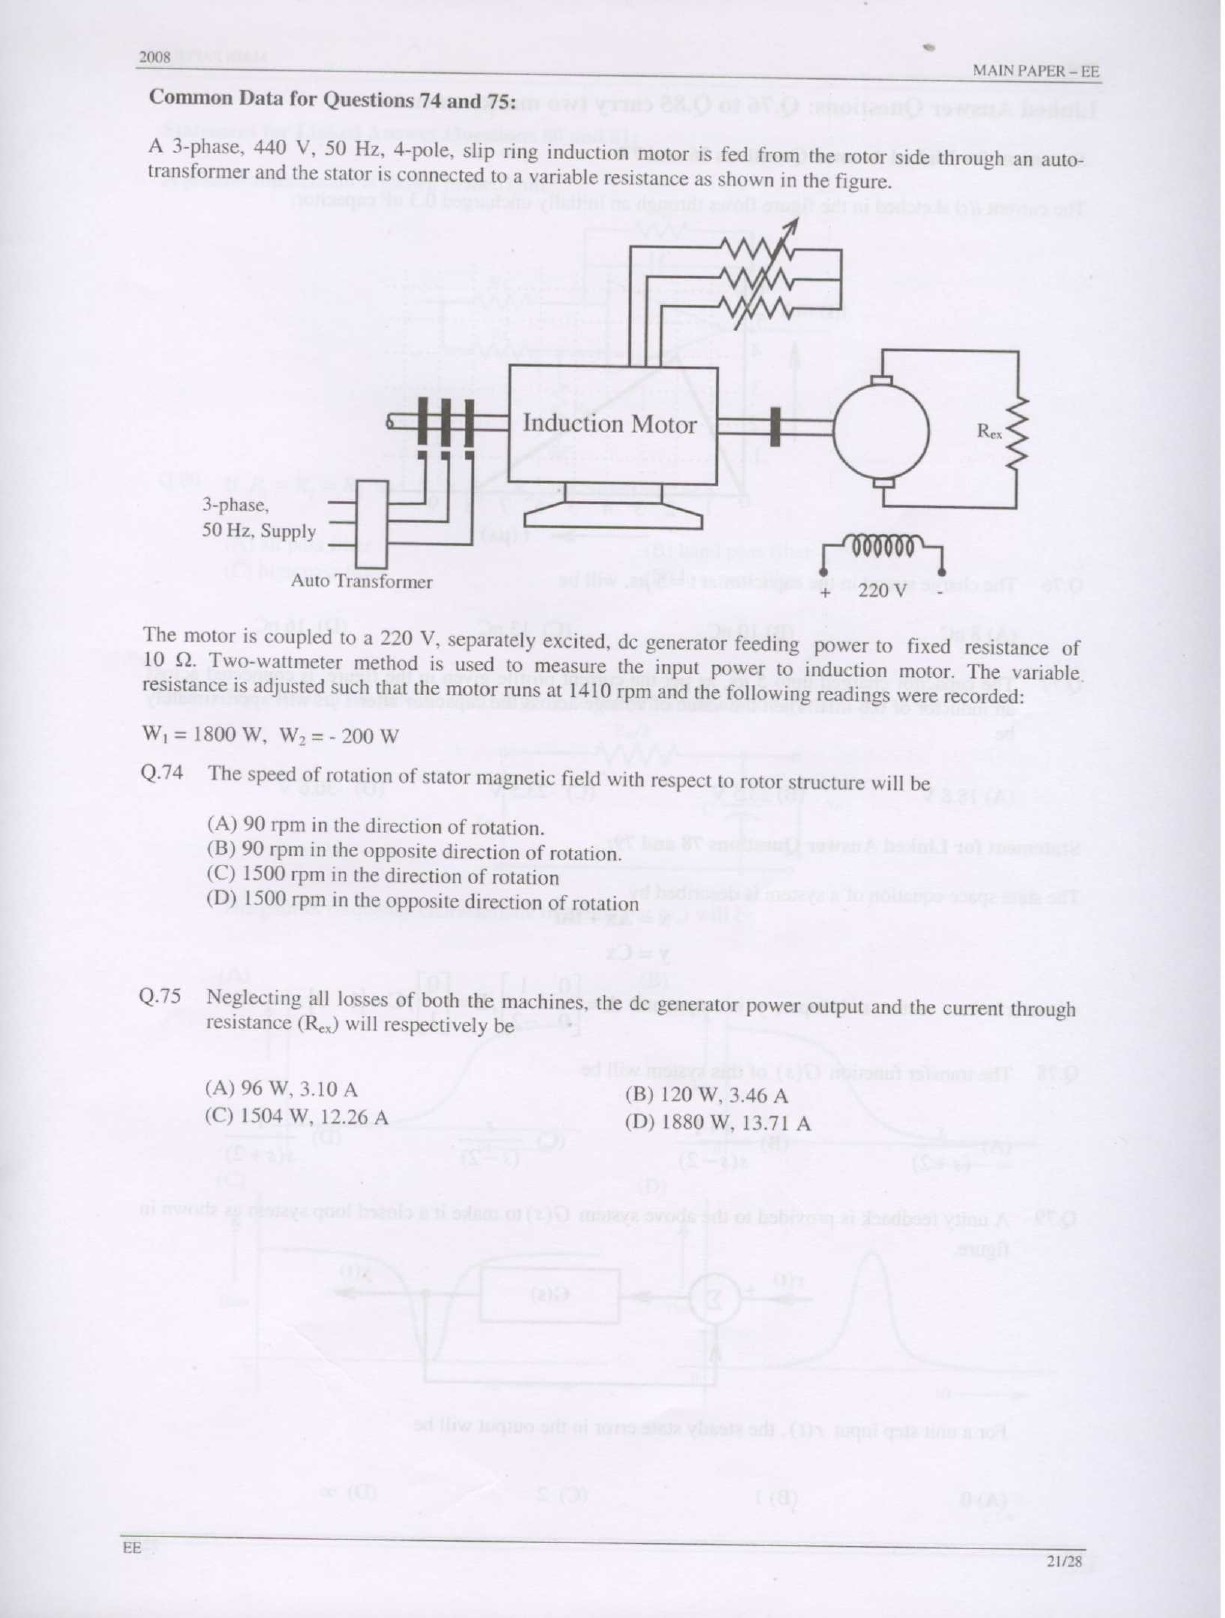 GATE Exam Question Paper 2008 Electrical Engineering 21